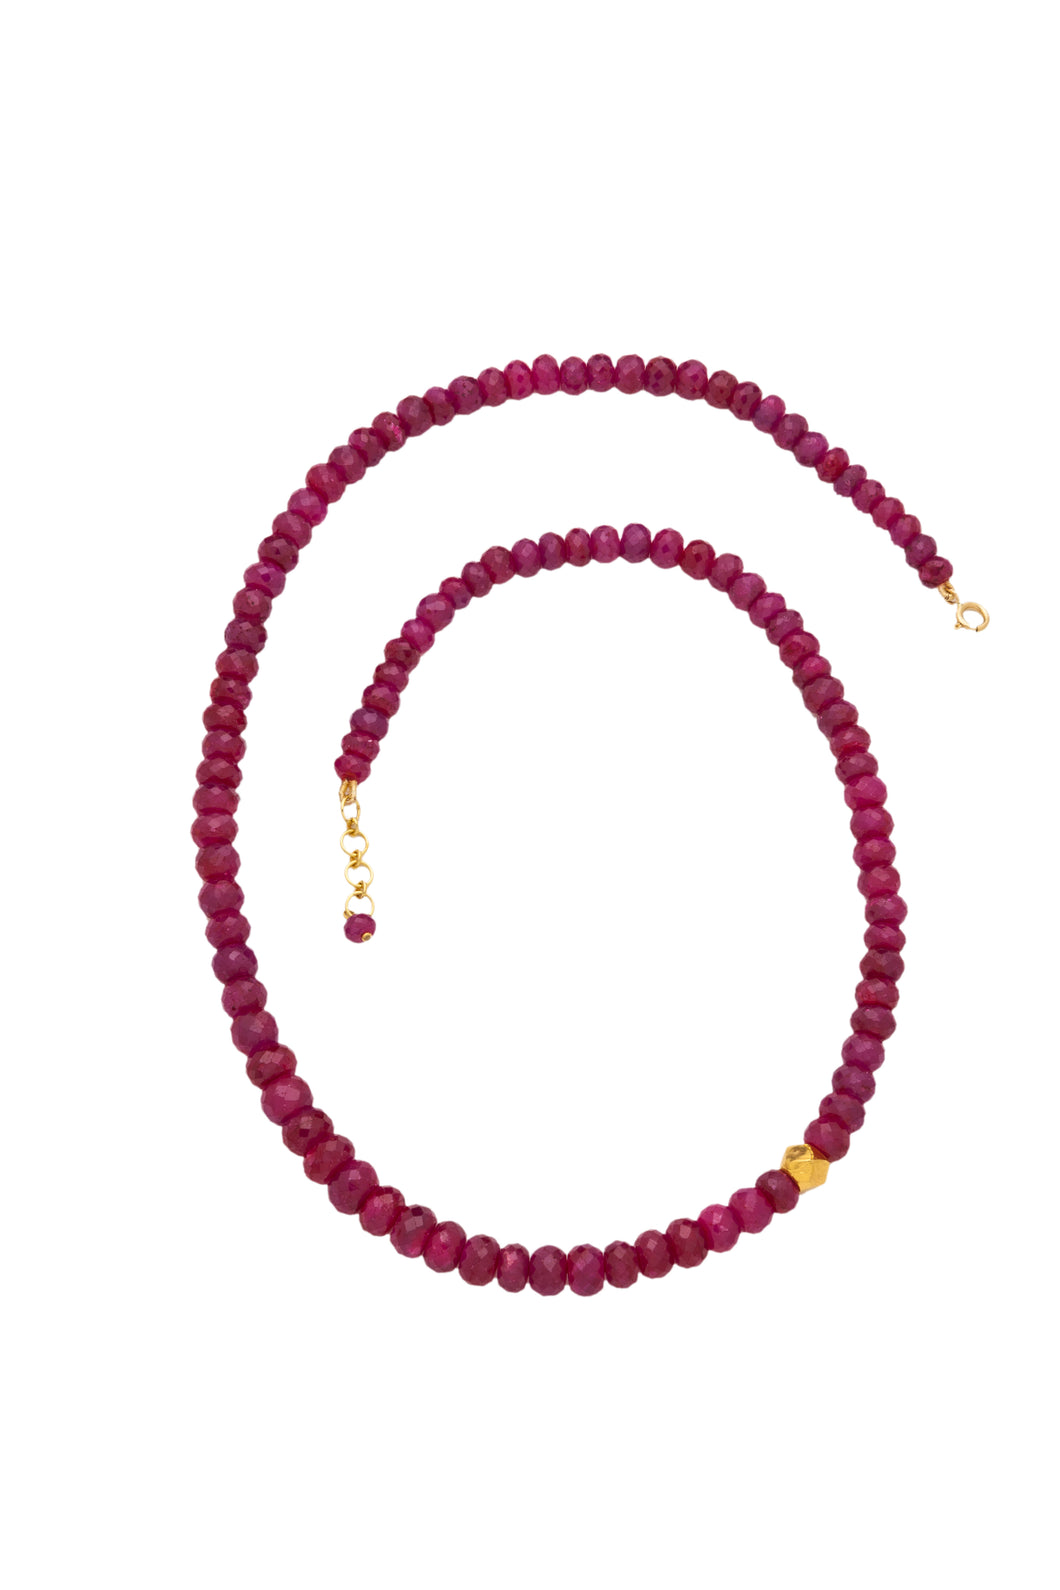 Ruby Beaded Faceted Gemstone 18kt Gold Necklace N002-R